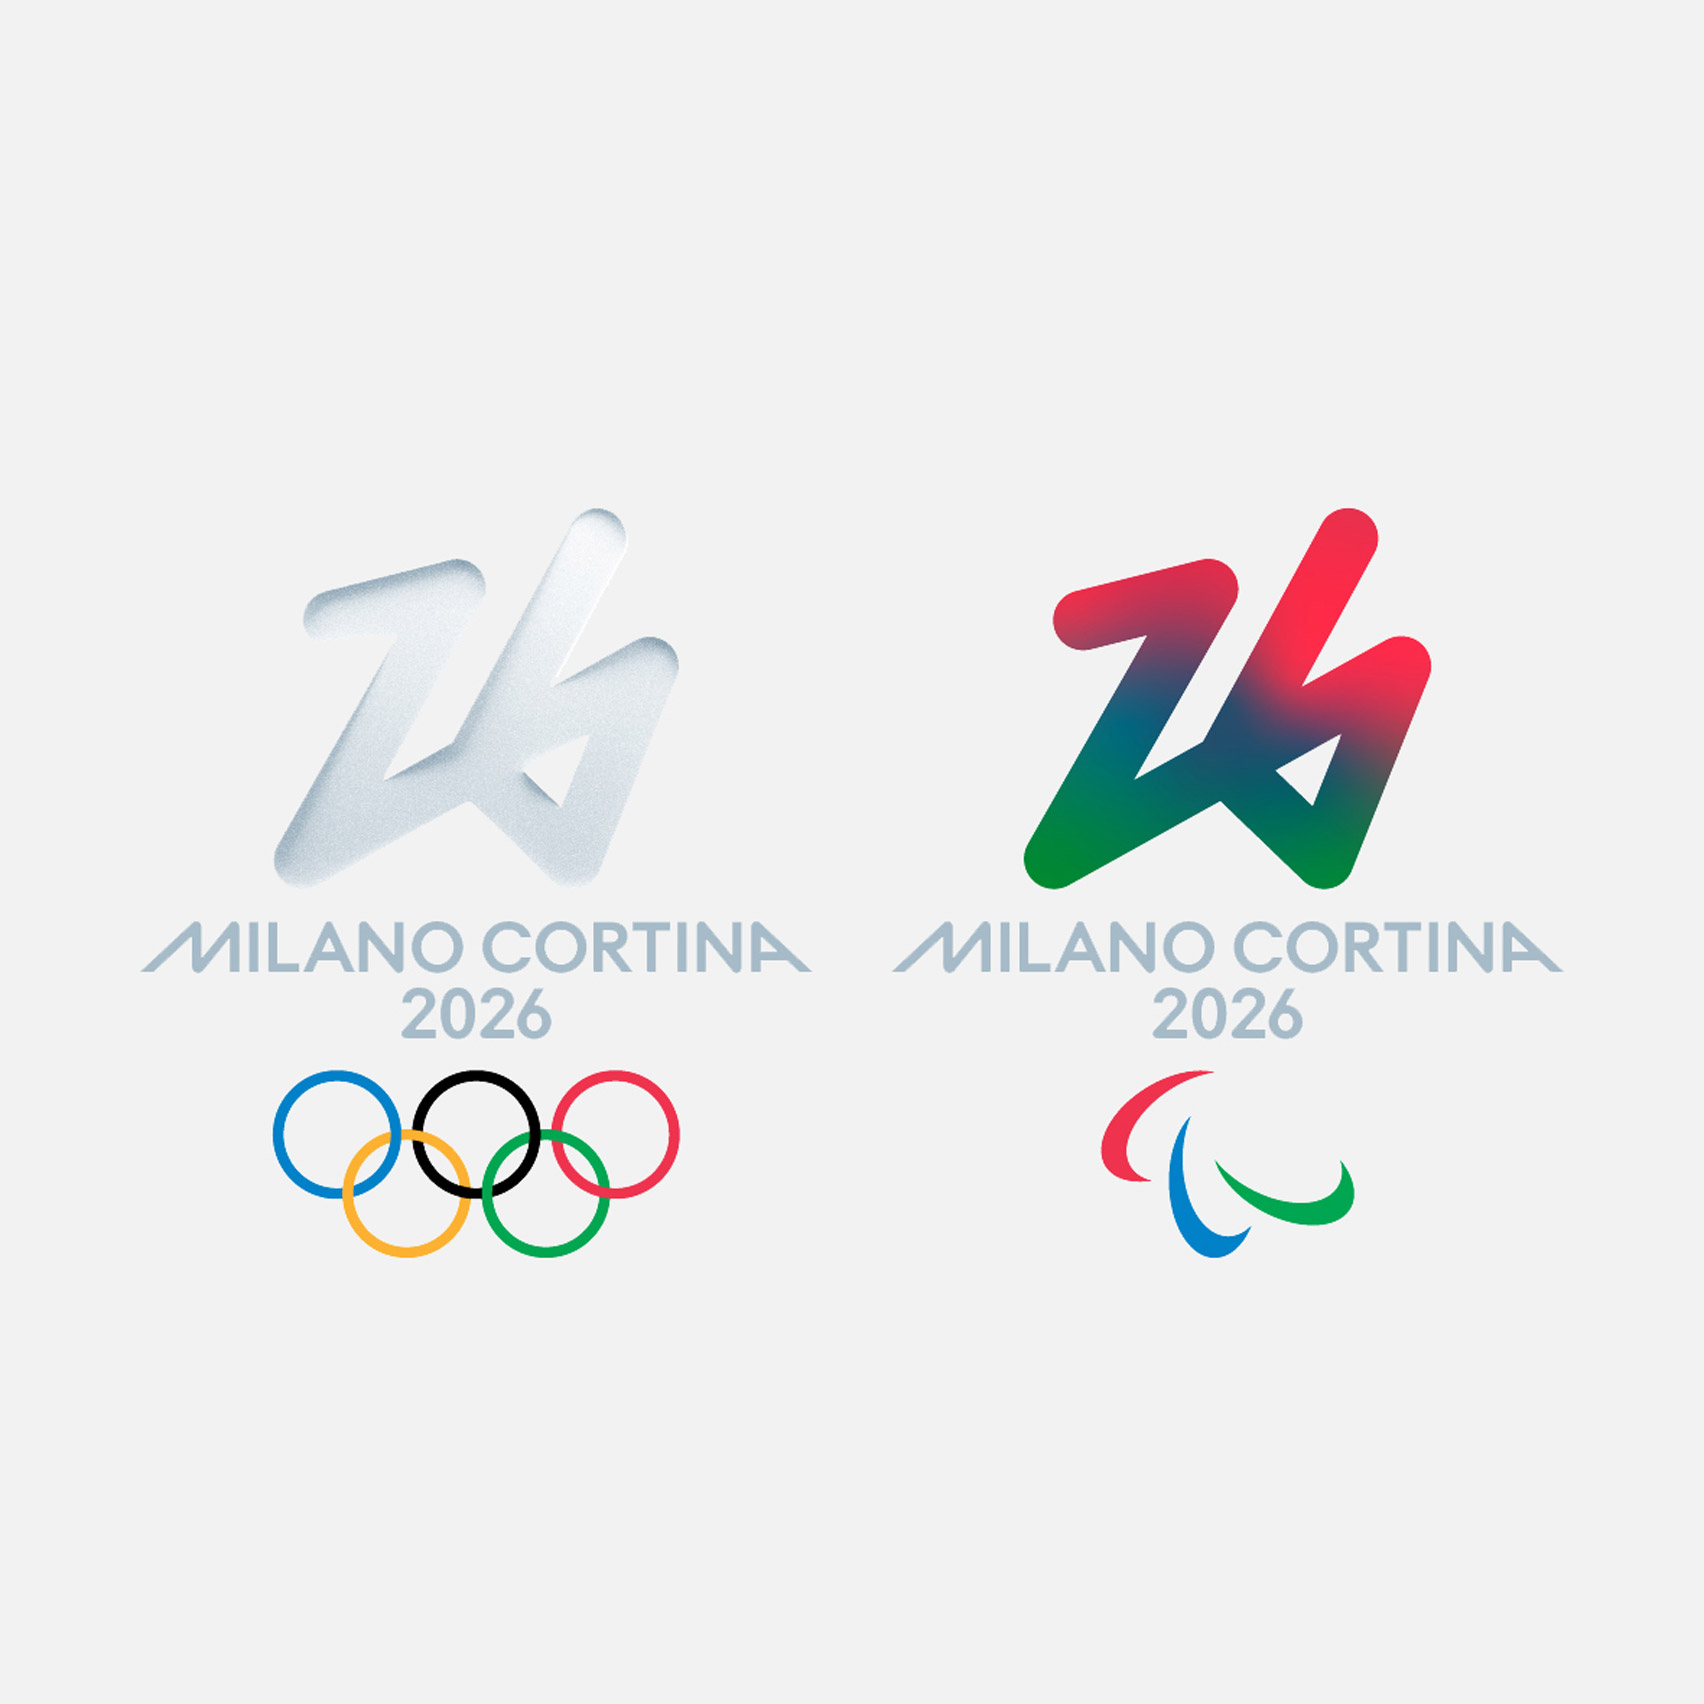 With the 2026 logo announced a couple days ago, wich of these is